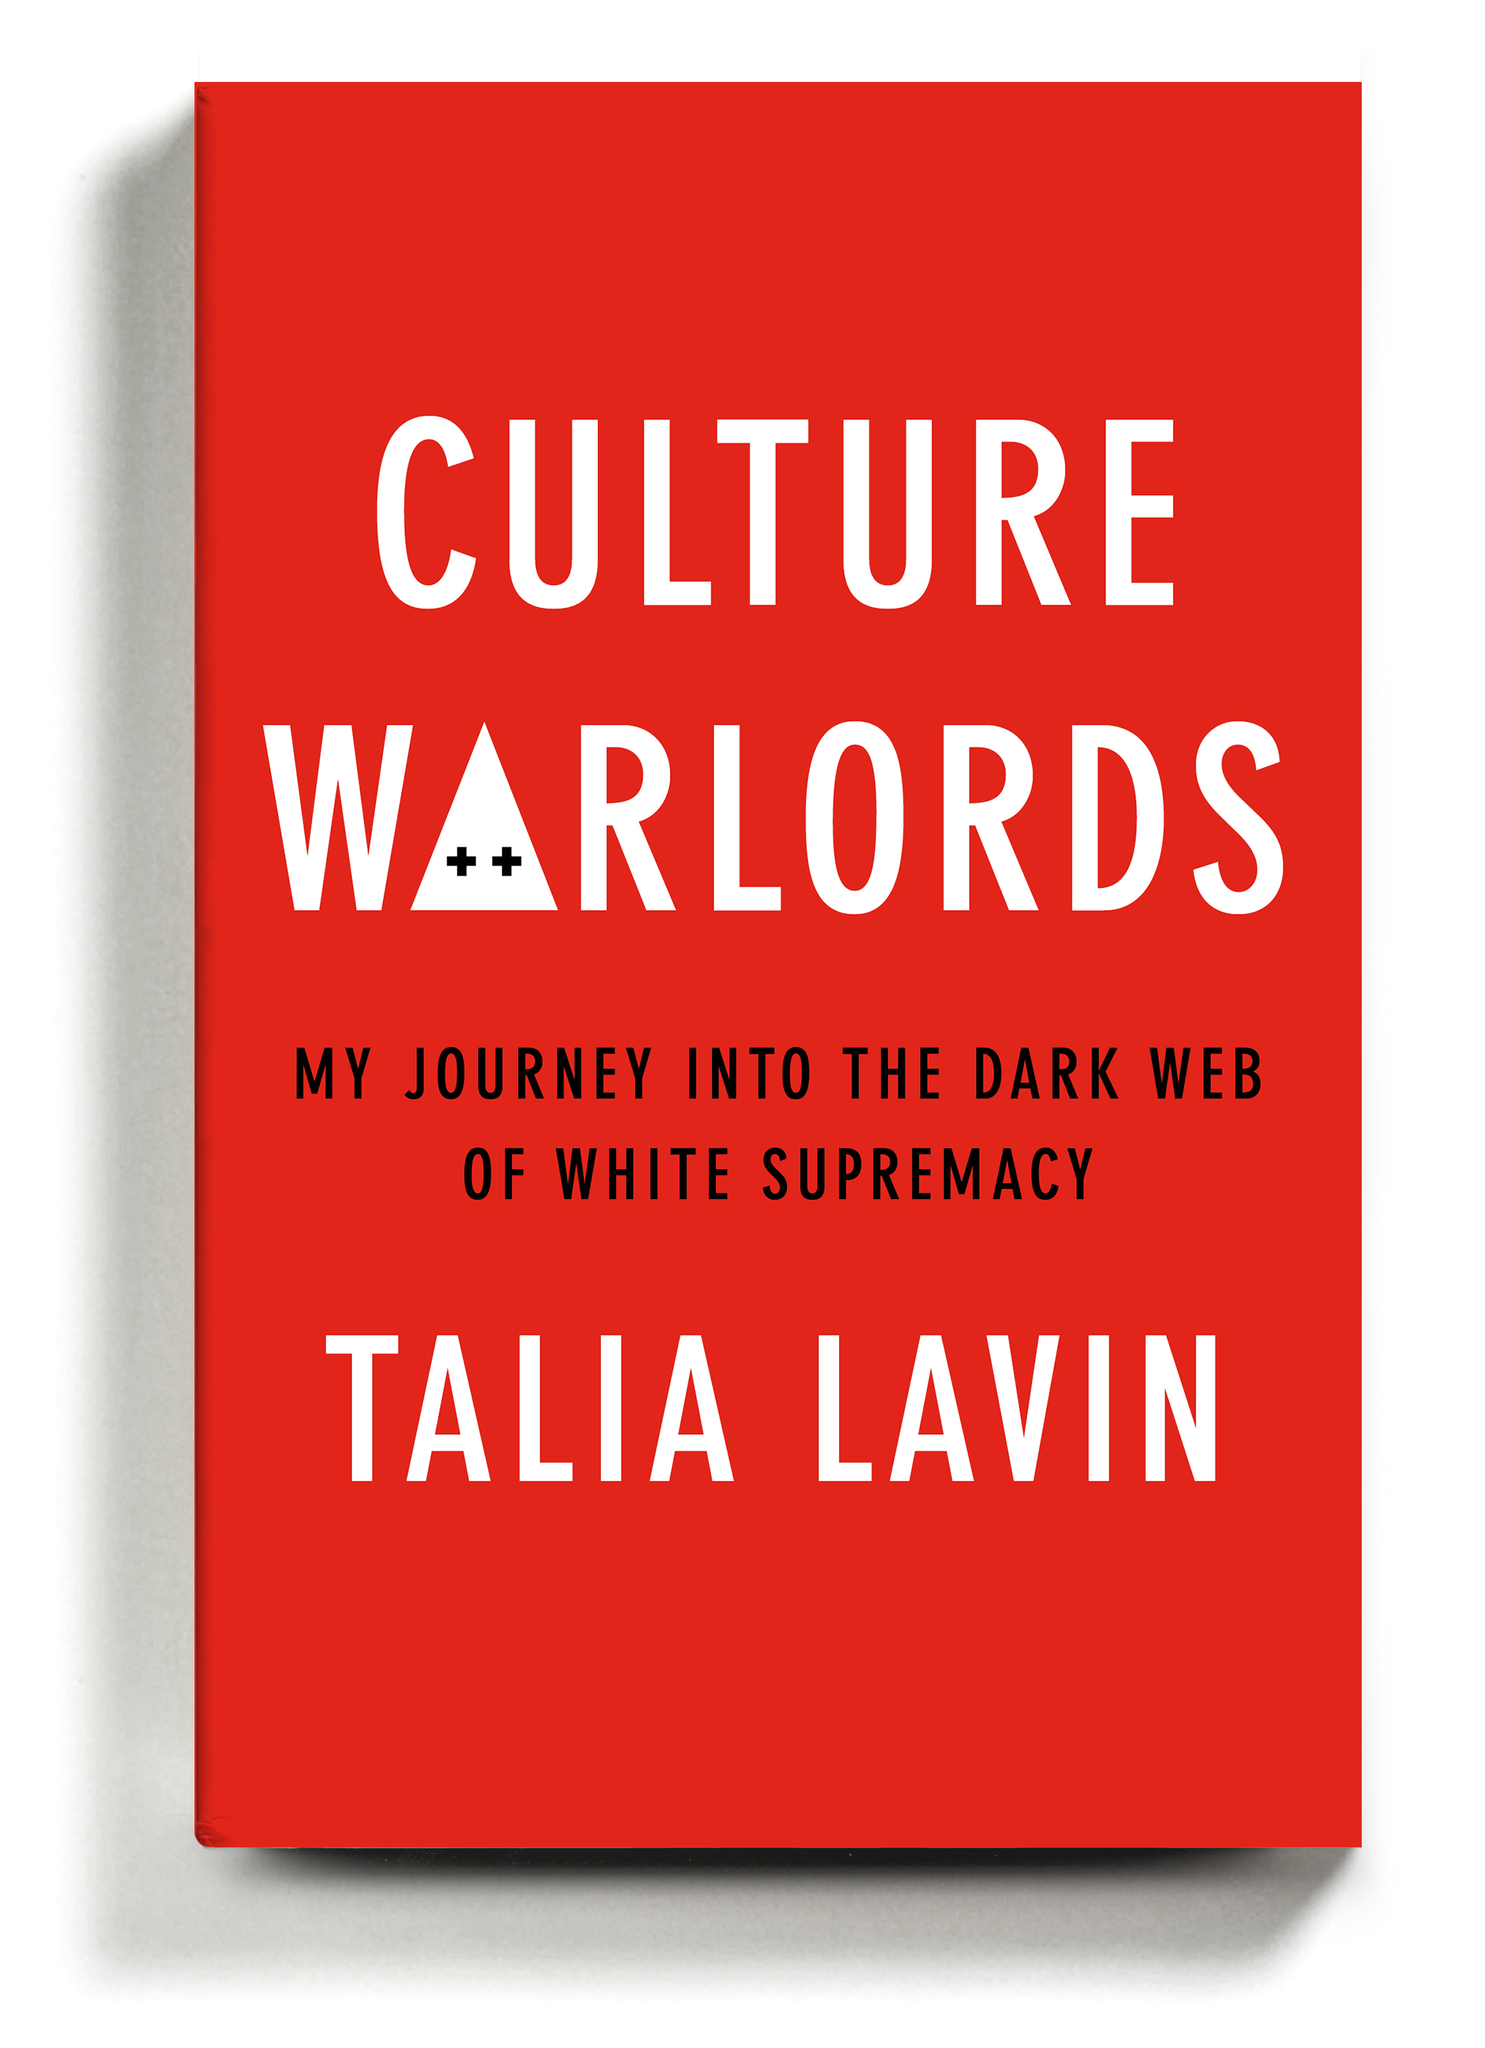 The book report: Culture Warlords